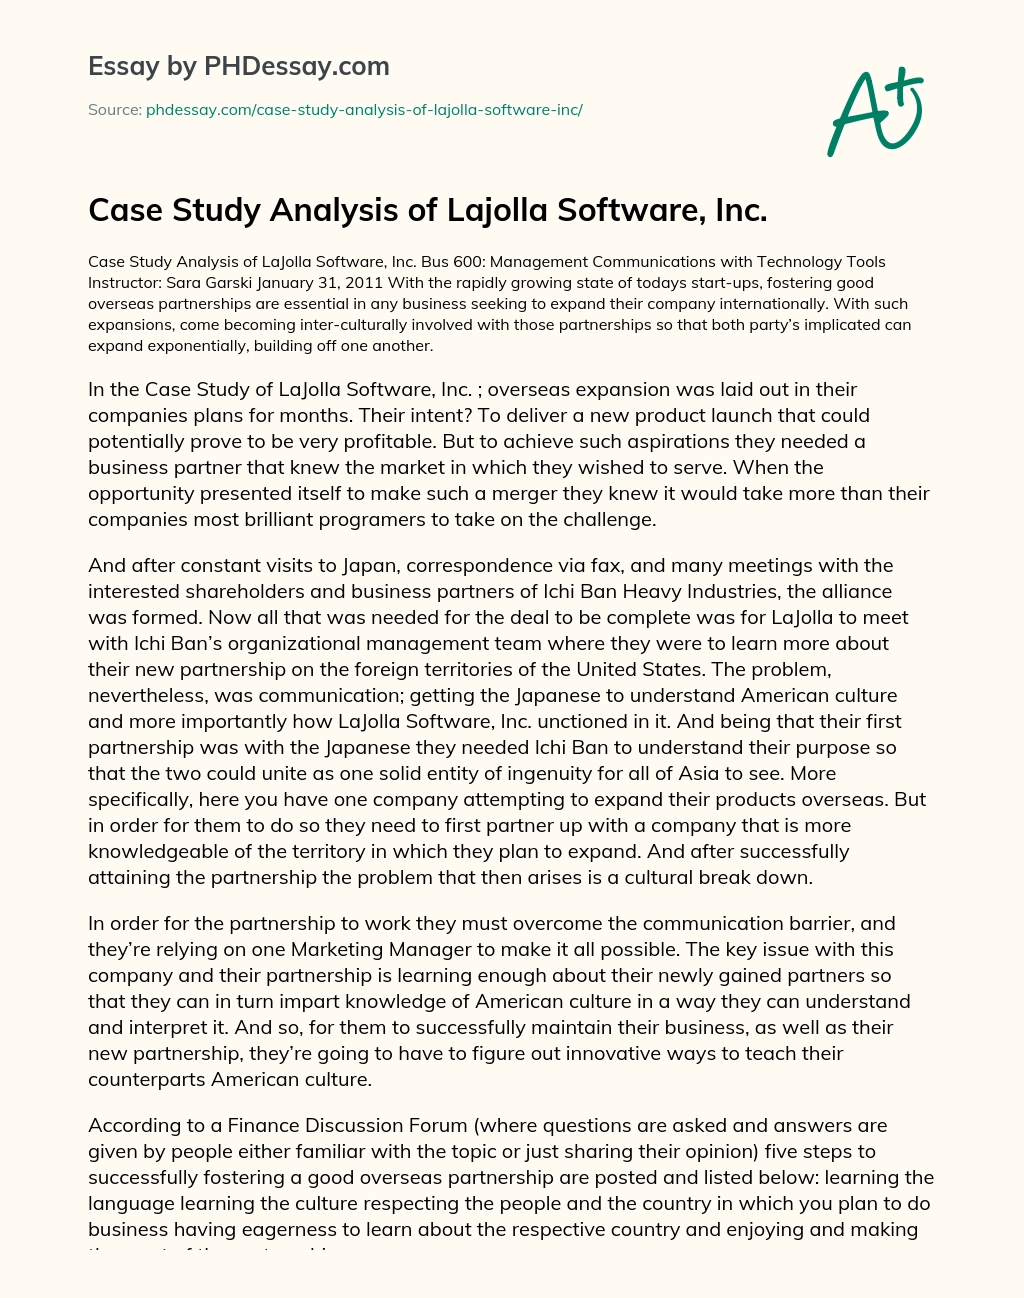 Case Study Analysis of Lajolla Software, Inc. essay